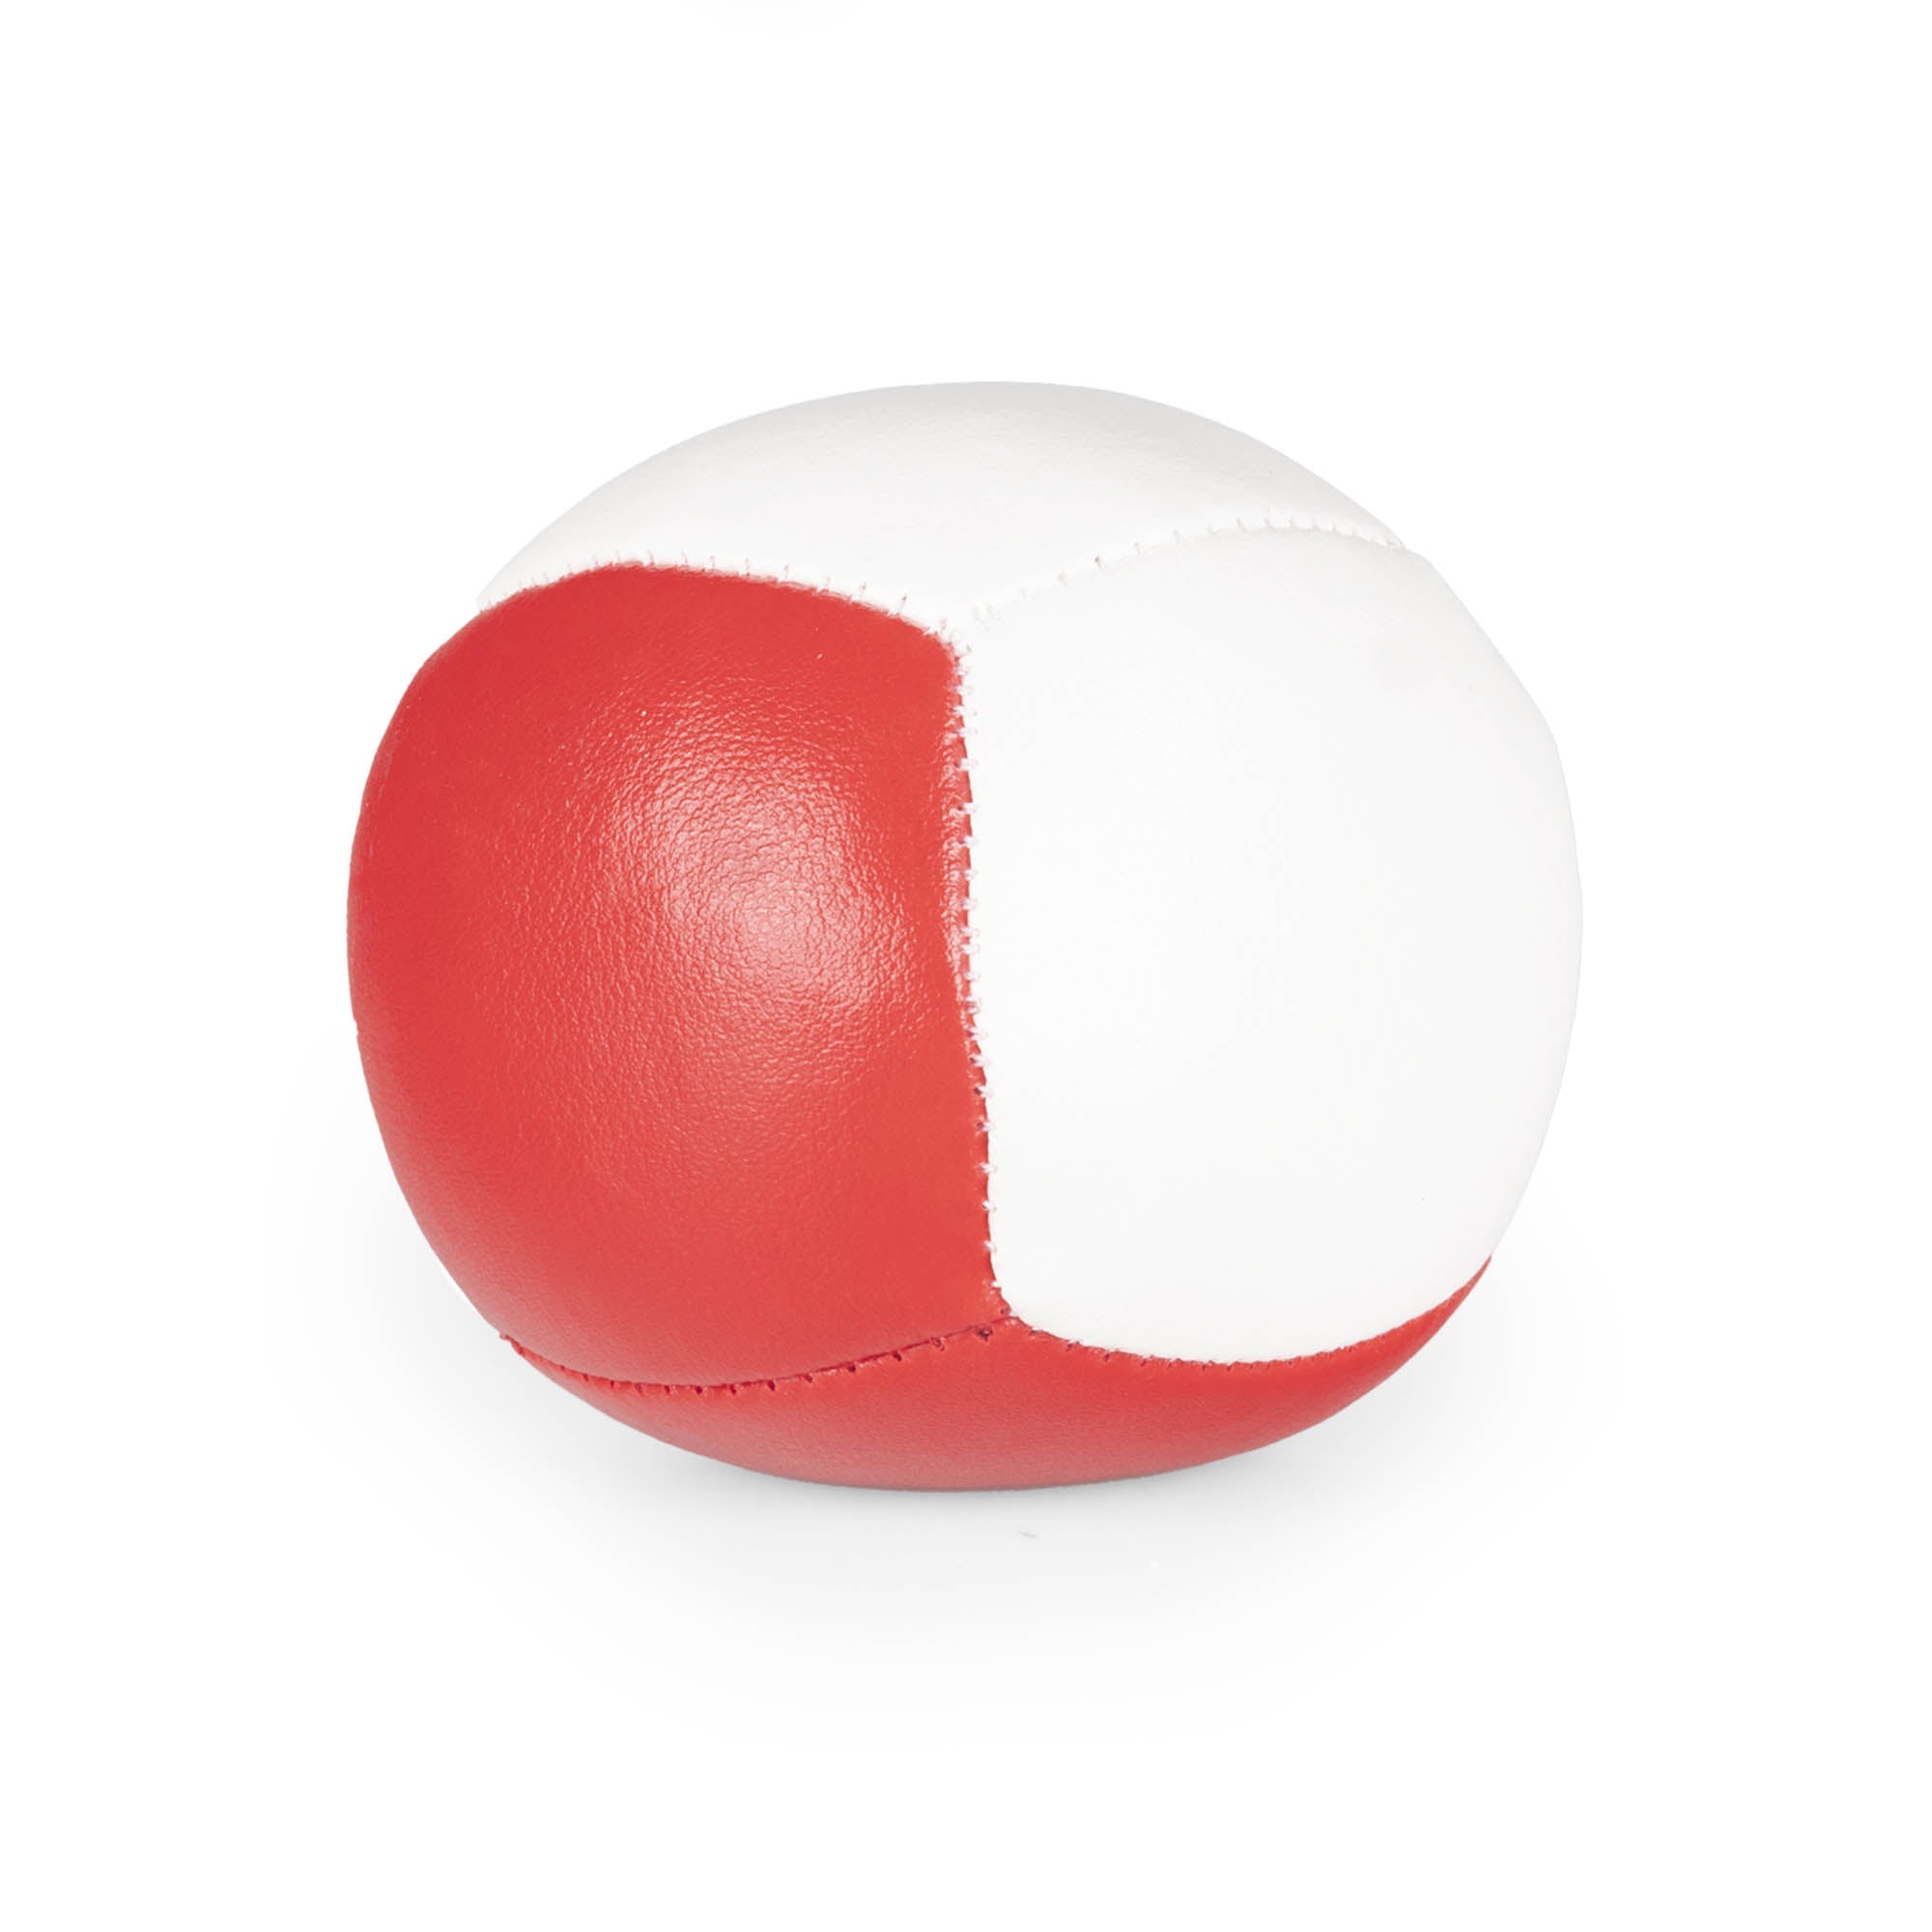 Firetoys red/white 110g thud juggling ball, straight on in a white background